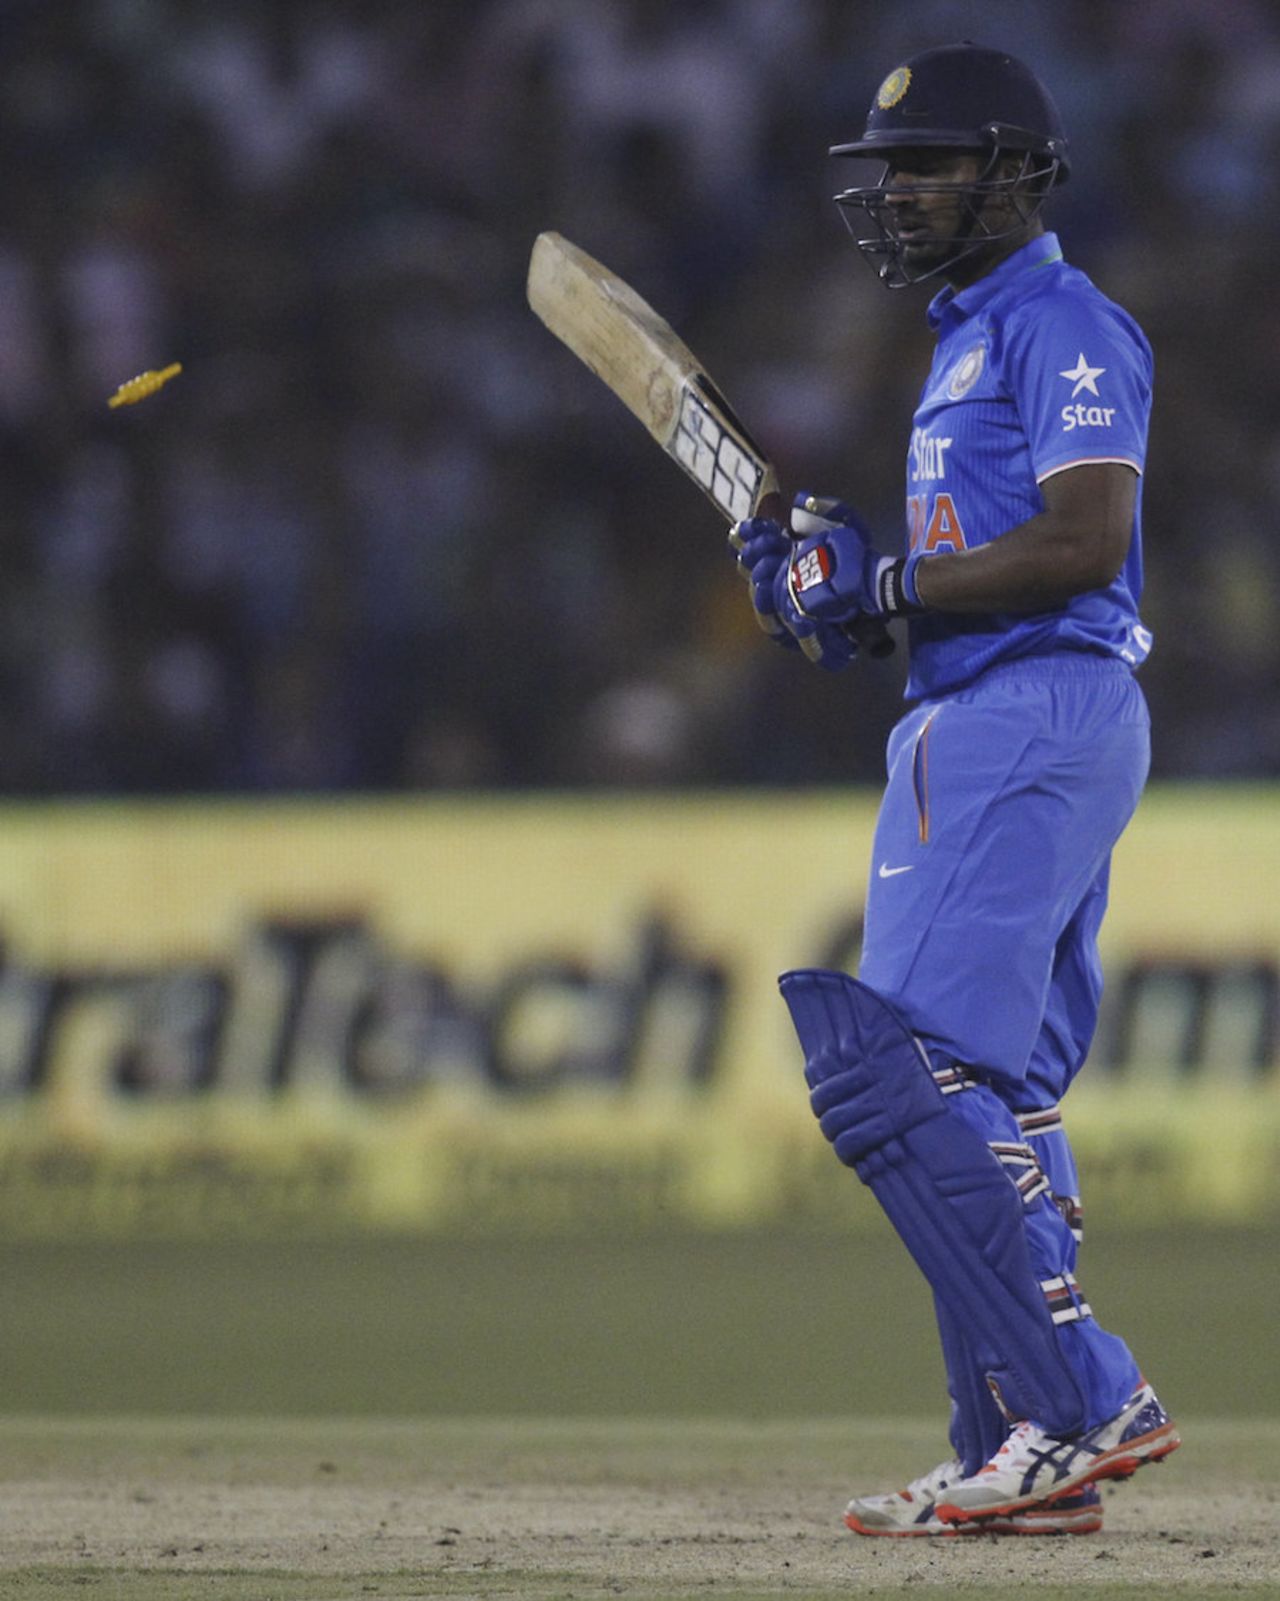 Ambati Rayudu was left bemused after missing a full toss, India v South Africa, 2nd T20I, Cuttack, October 5, 2015